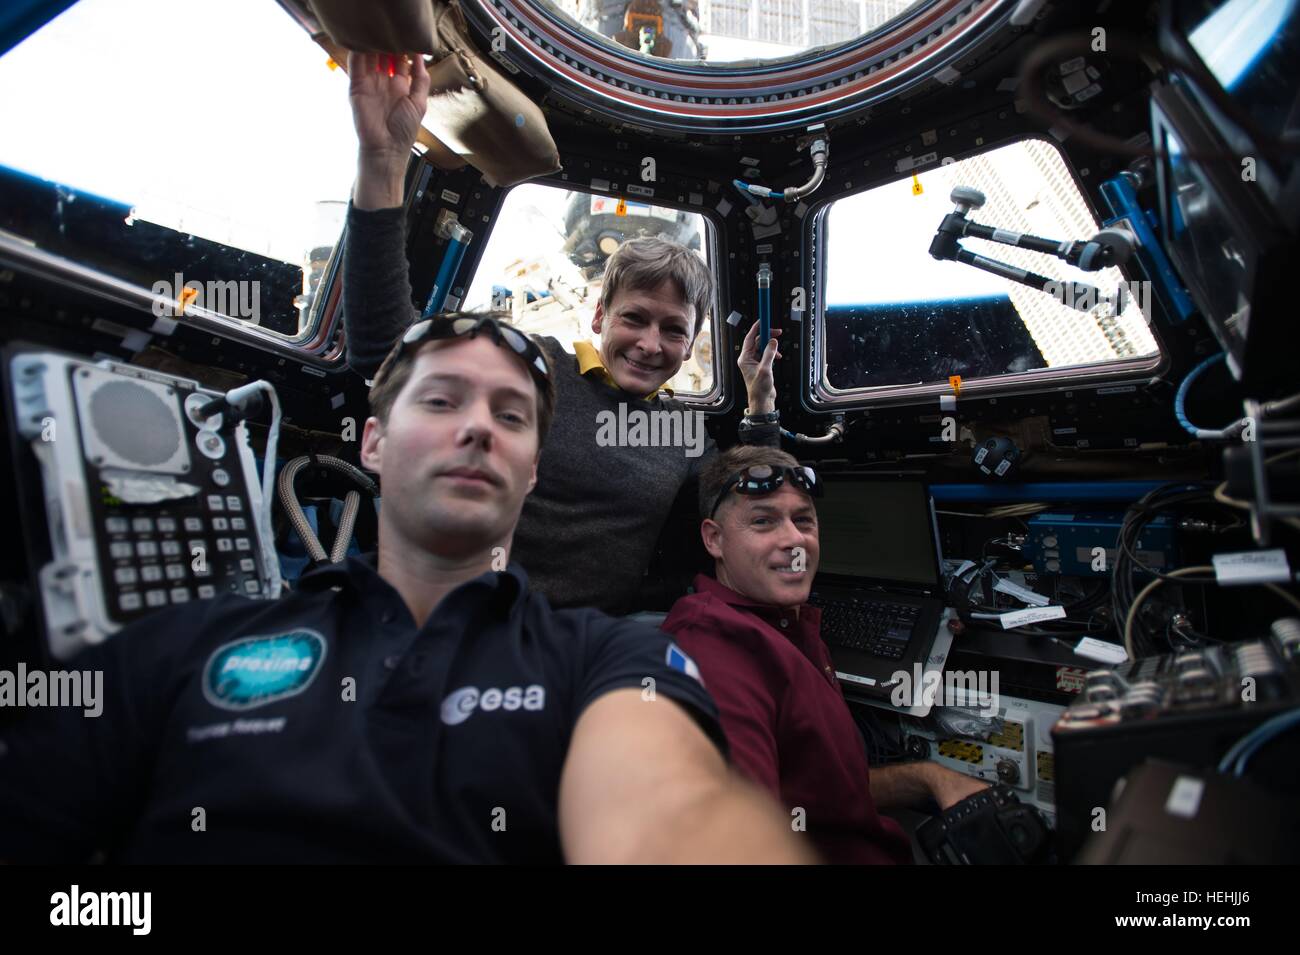 NASA Expedition 50 crew members astronauts Shane Kimbrough and Peggy Whitson of NASA and French astronaut Thomas Pesquet of the European Space Agency undergo robotics training inside the International Space Station Cupola December 6, 2016 in Earth orbit. Stock Photo